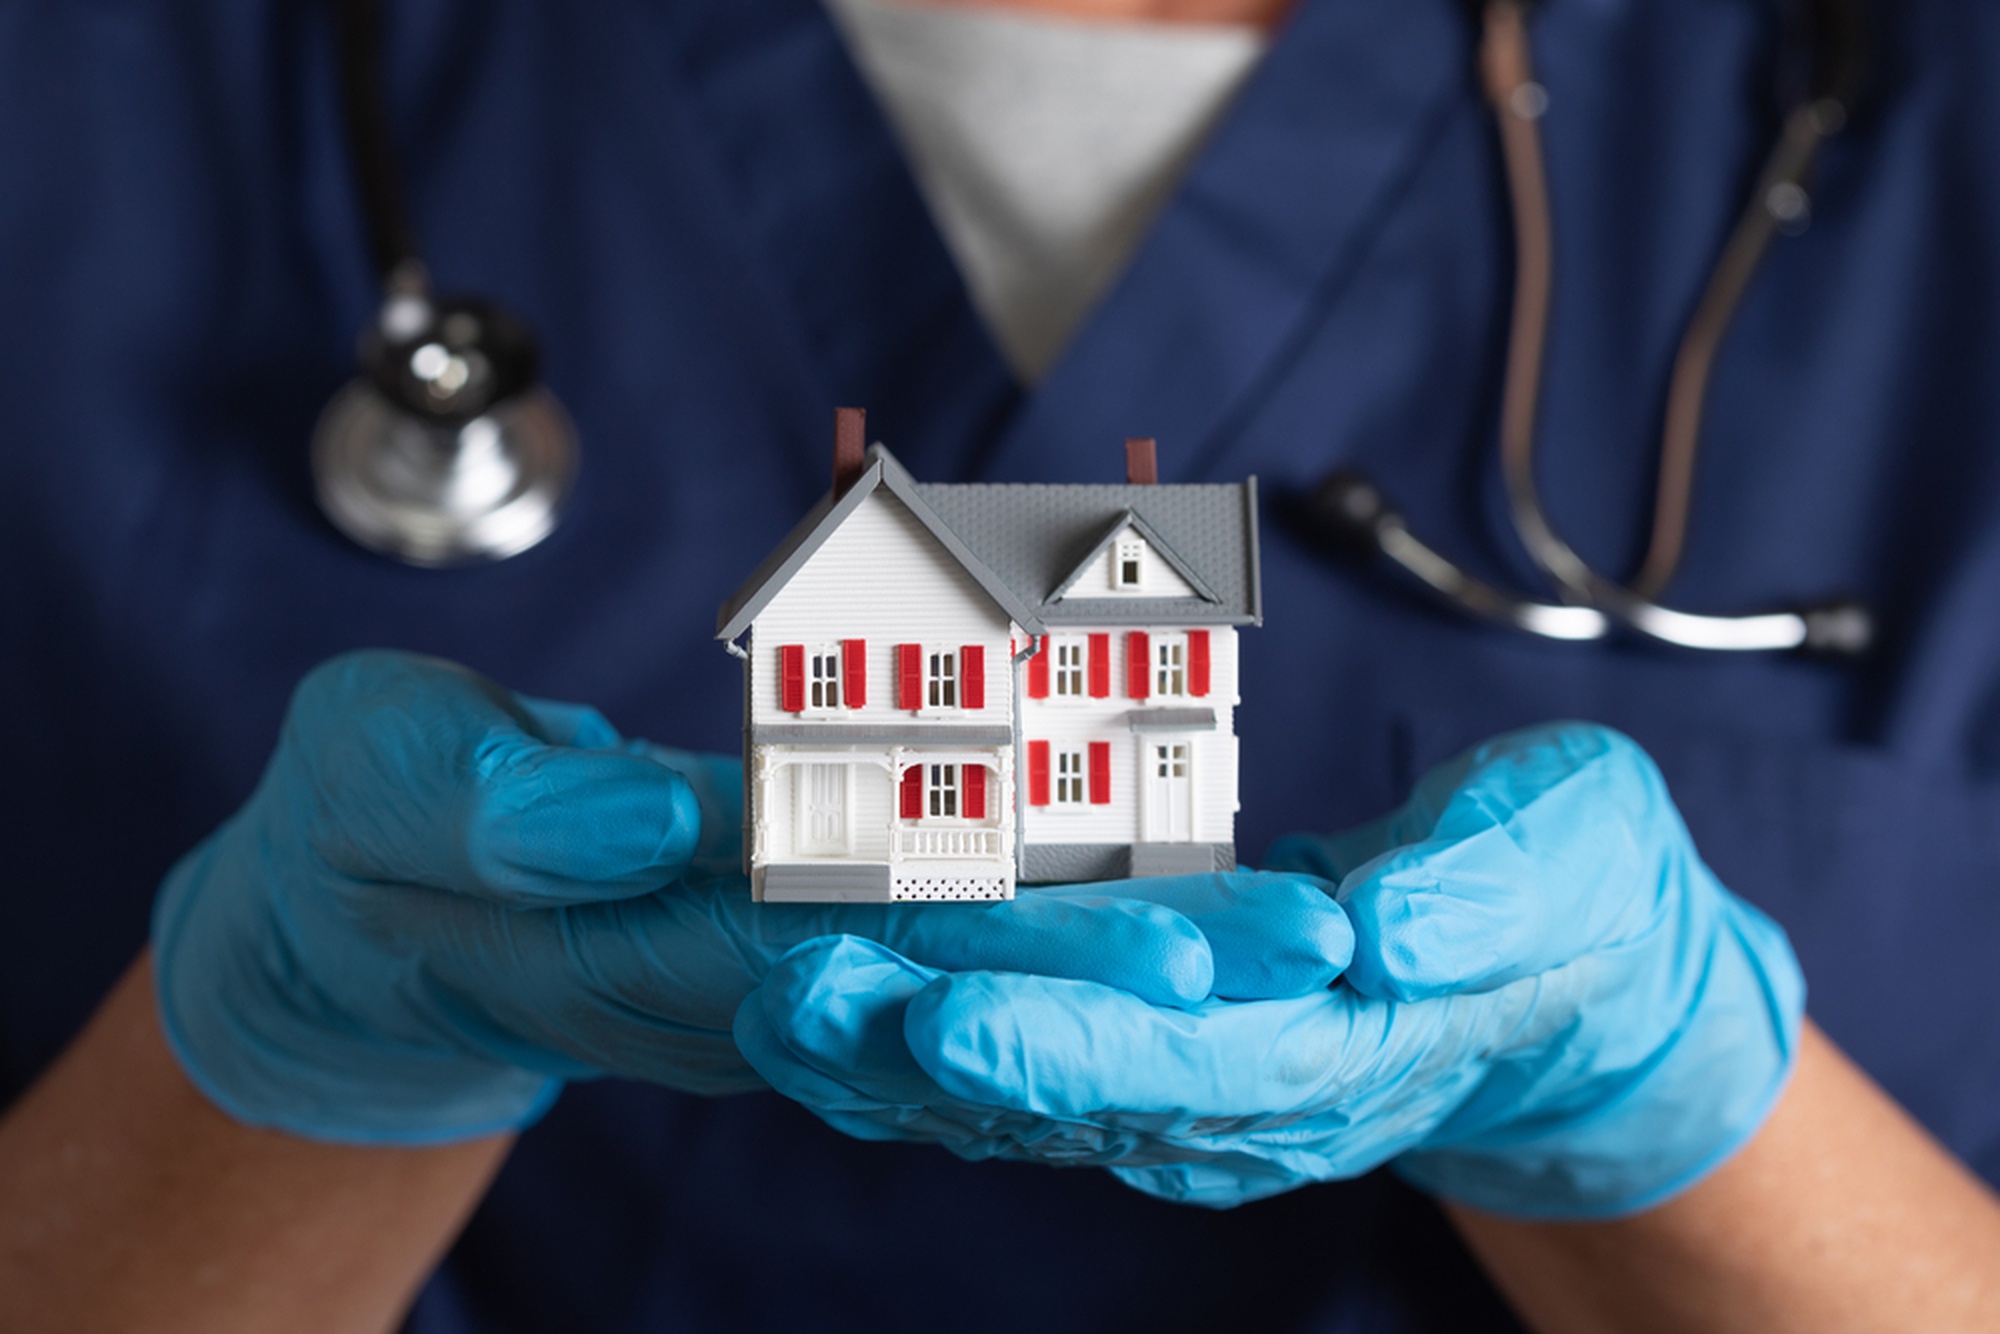 Home Healthcare Market Trends to Follow: Industry Overview